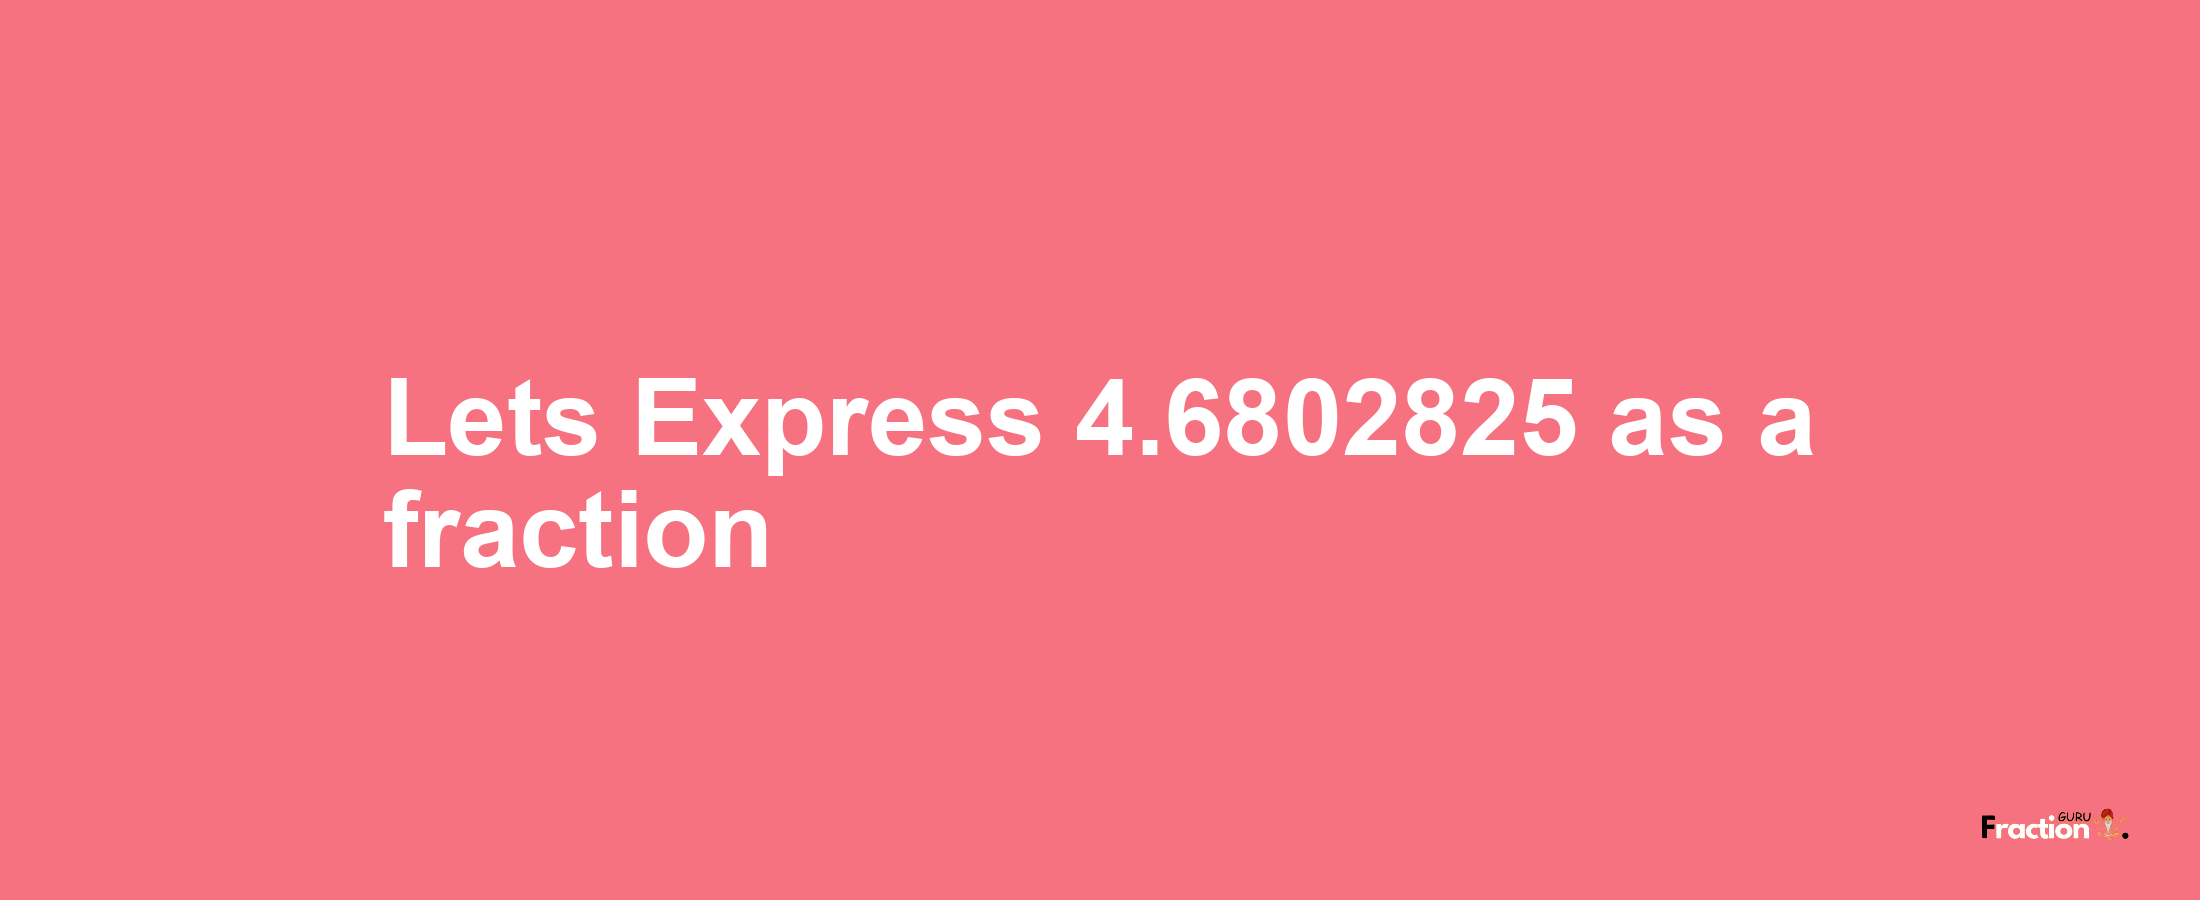 Lets Express 4.6802825 as afraction